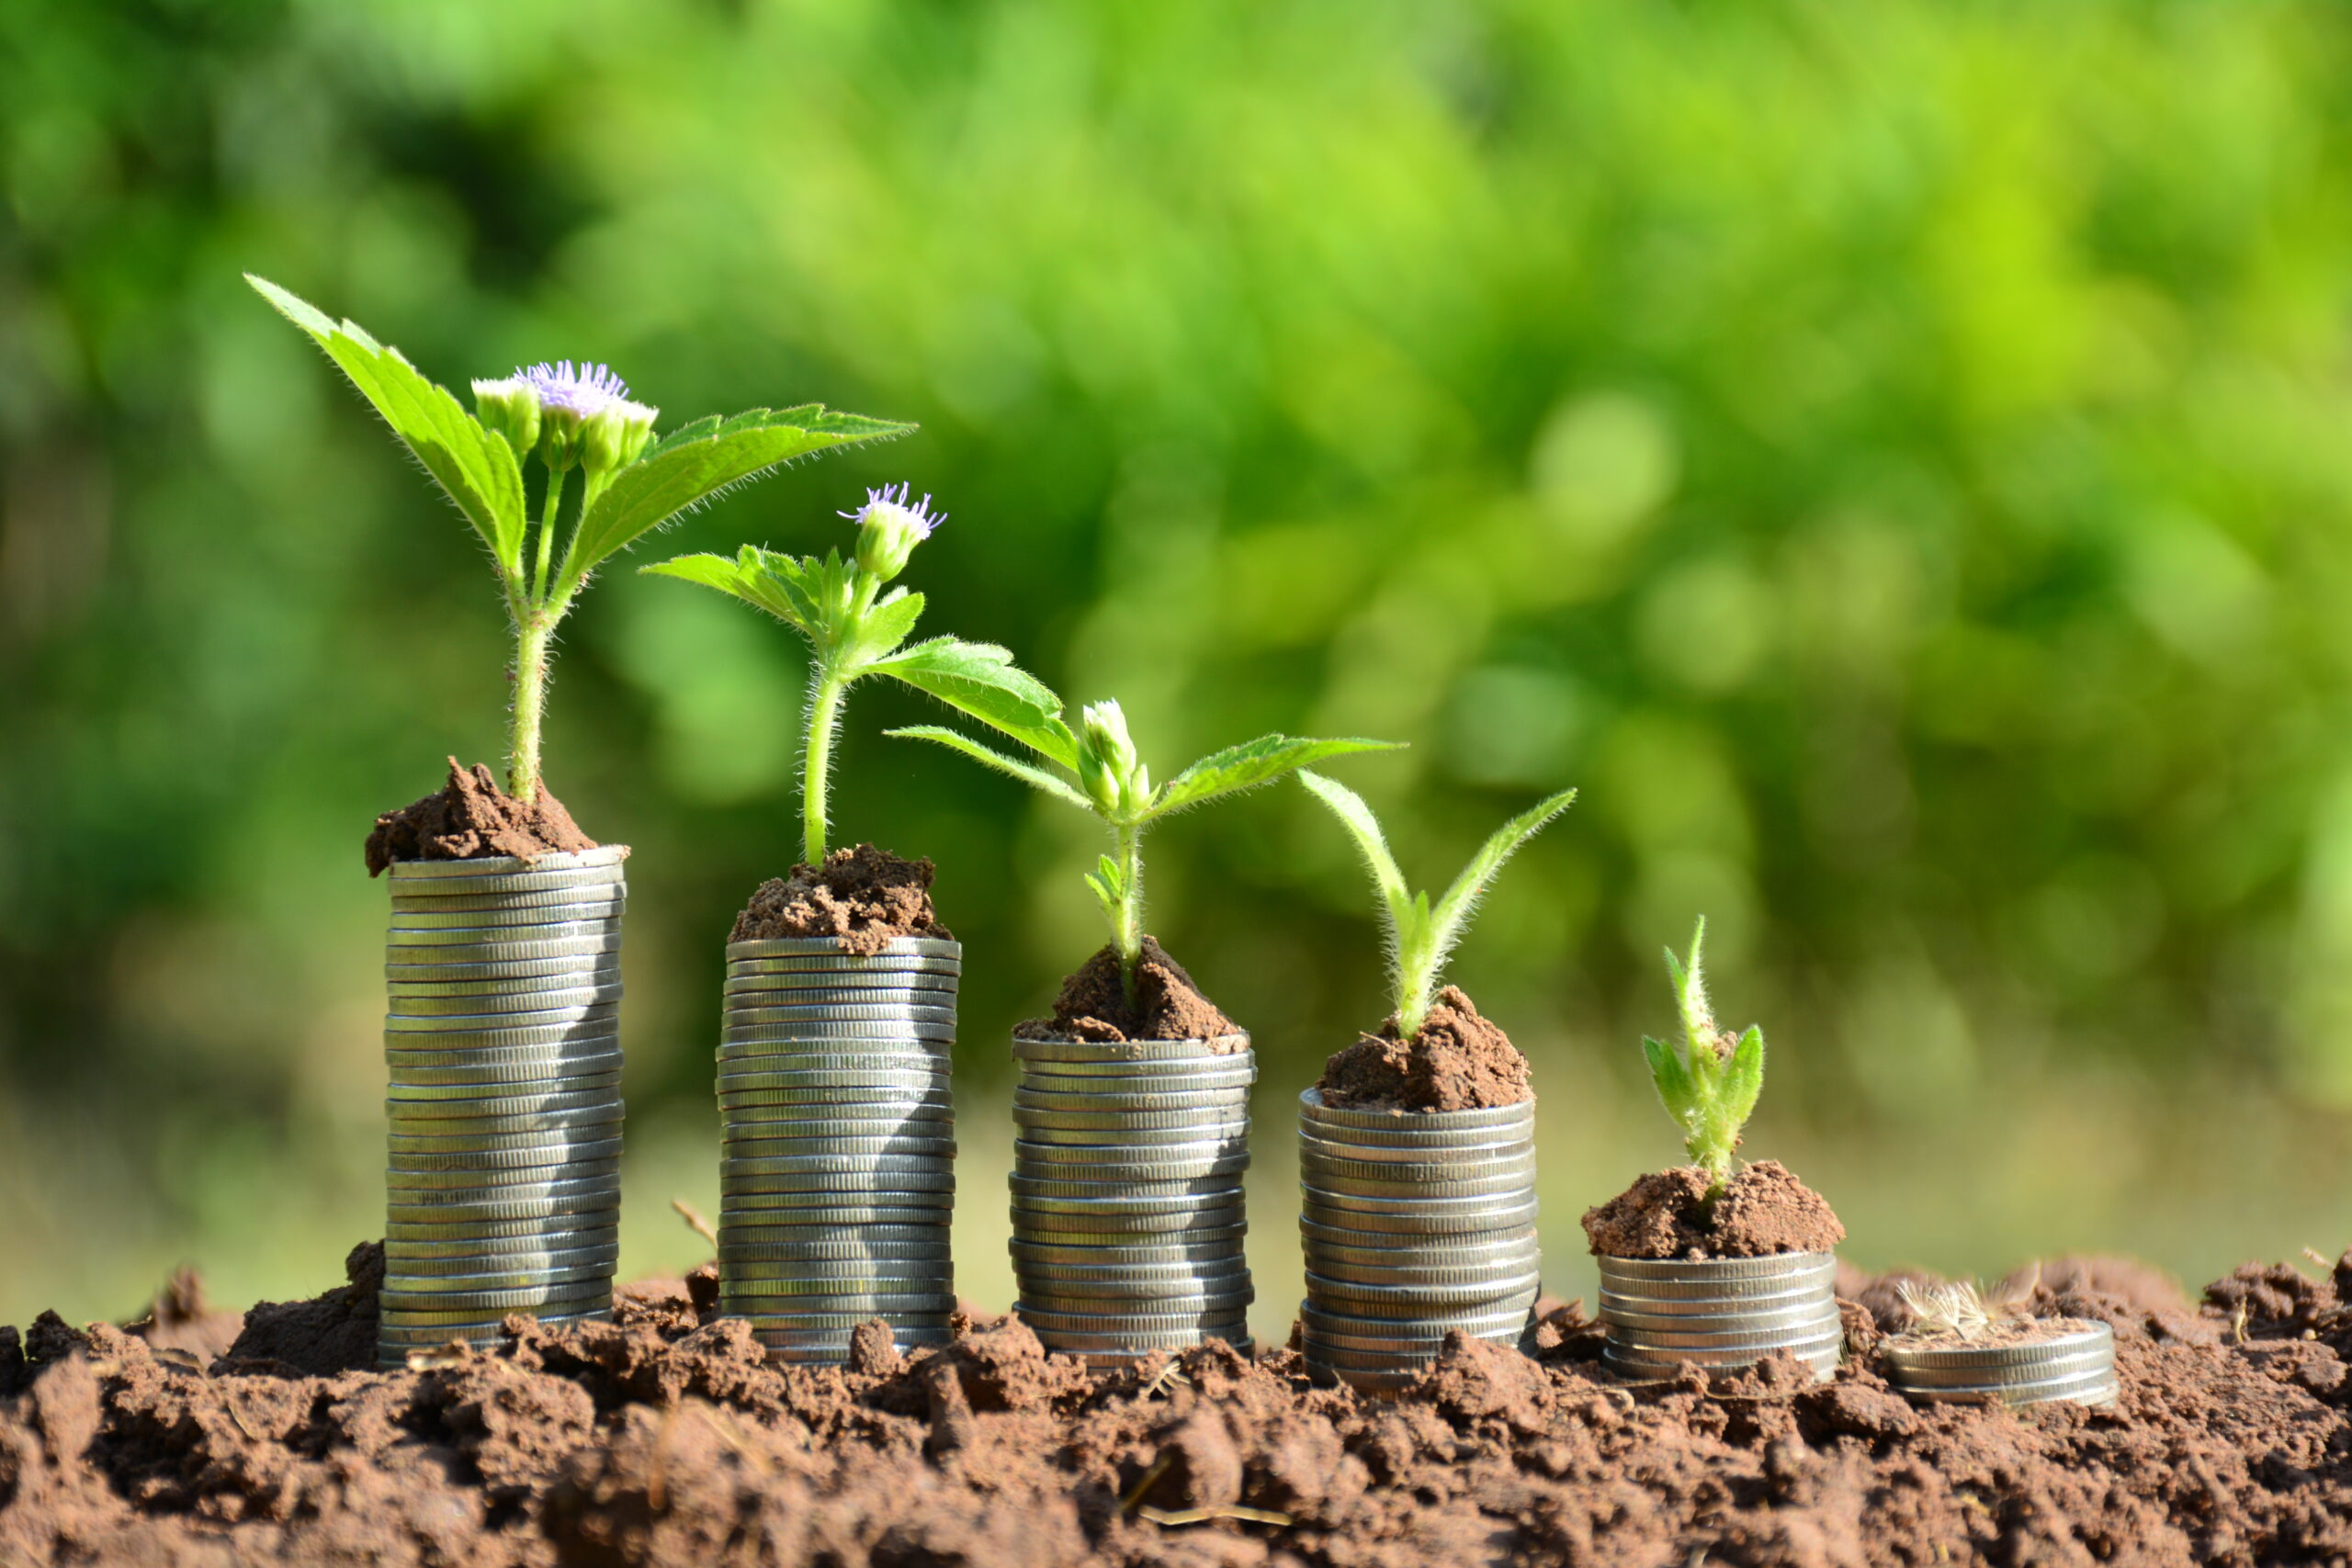 Finance stack coins and the green plant on soil and nature background